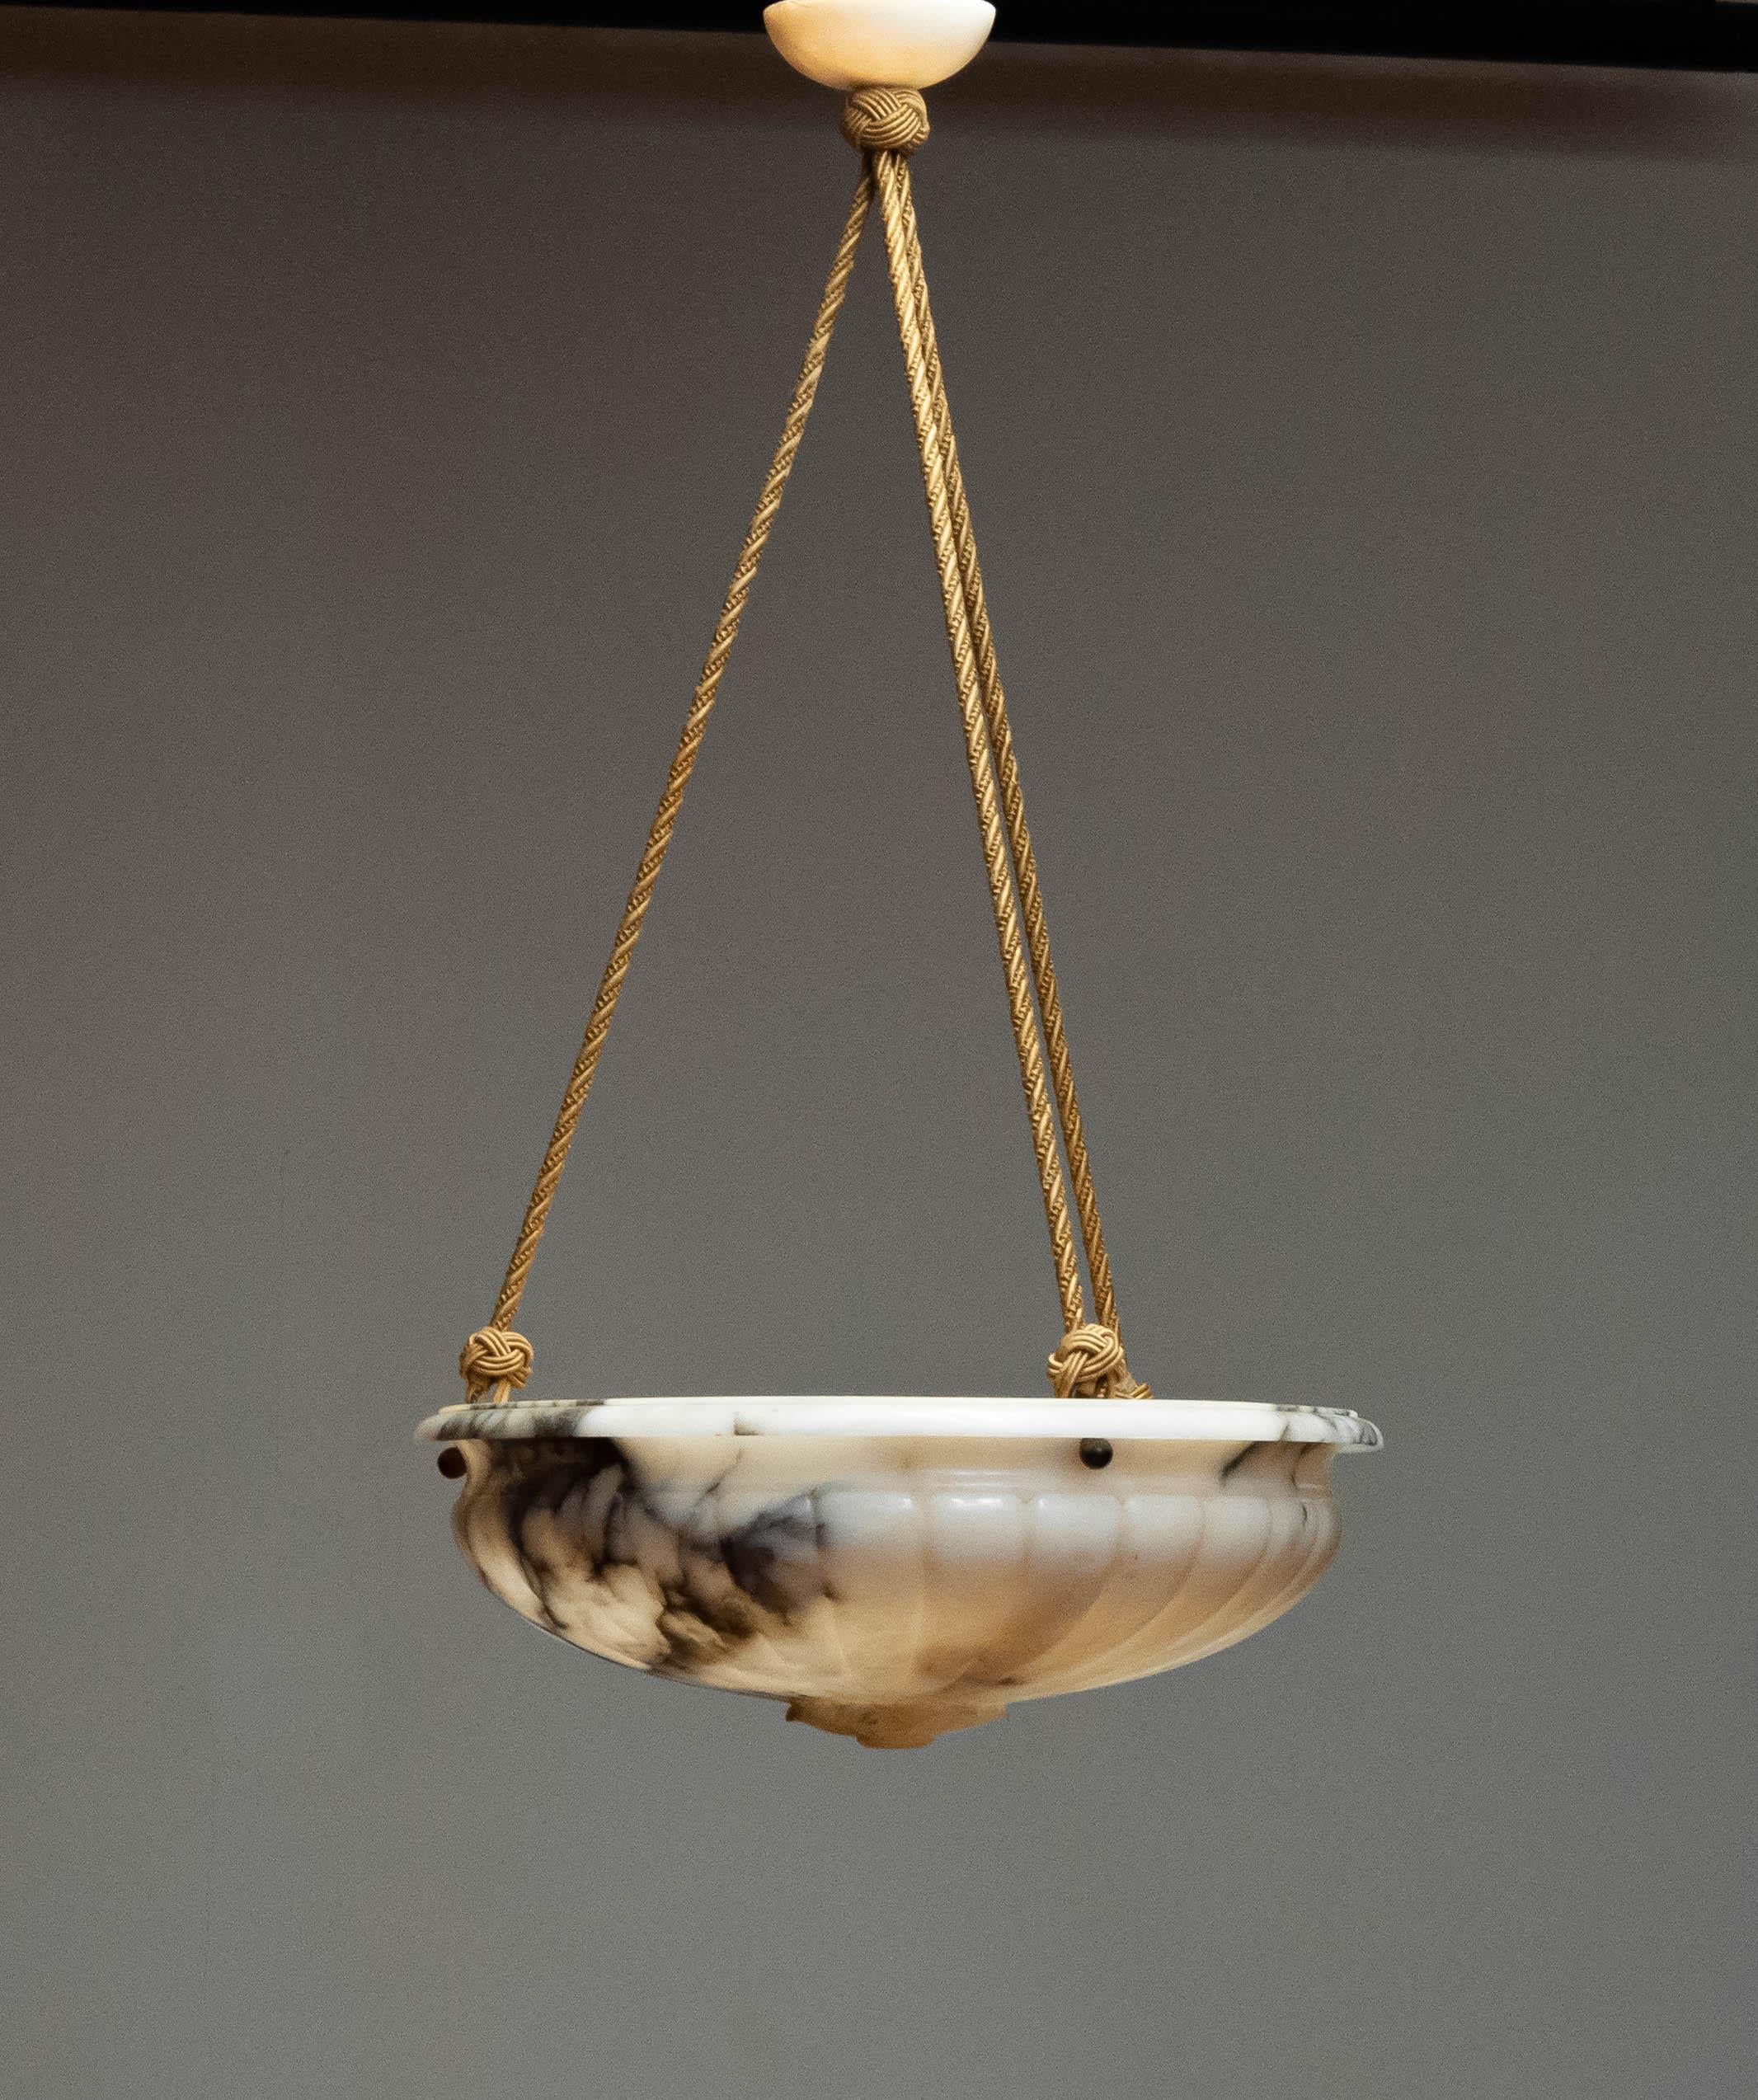 Early 1900s White With Black Accents Alabaster Up-Light Chandelier From Sweden For Sale 1